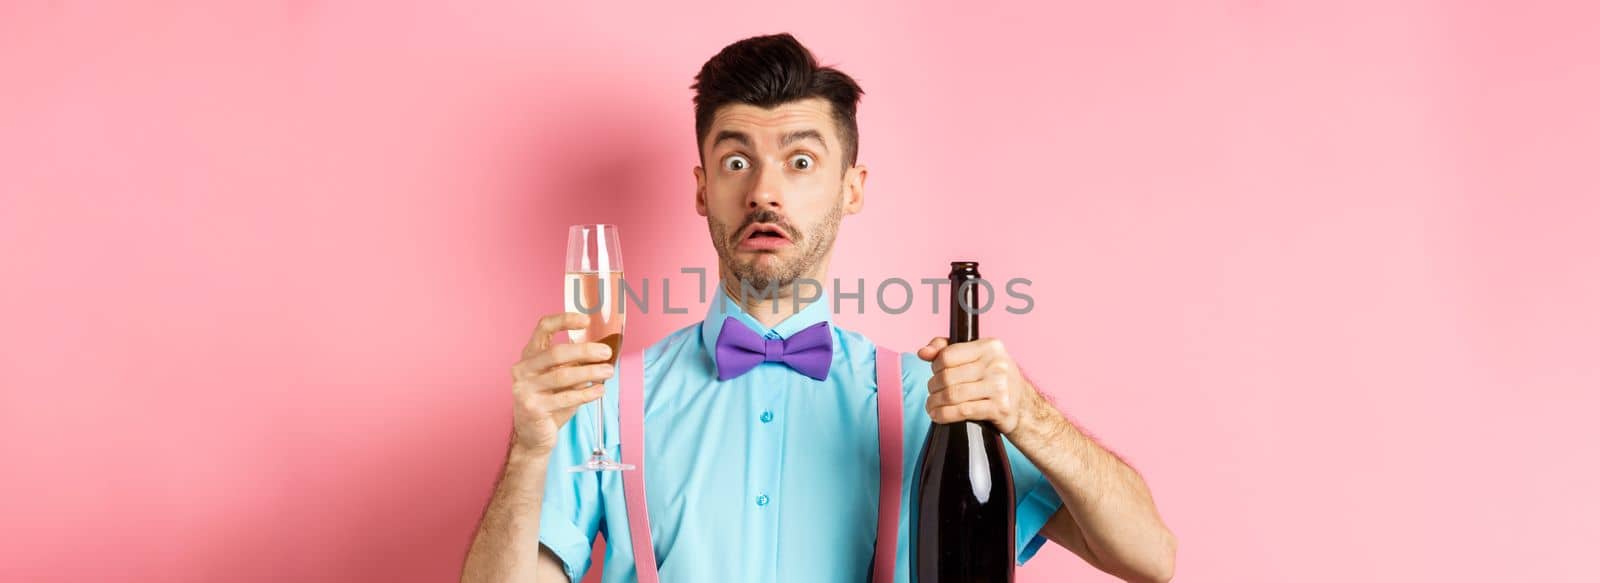 Holidays and celebration concept. Confused man staring startled at camera while pouring glass of champagne, standing puzzled over pink background.